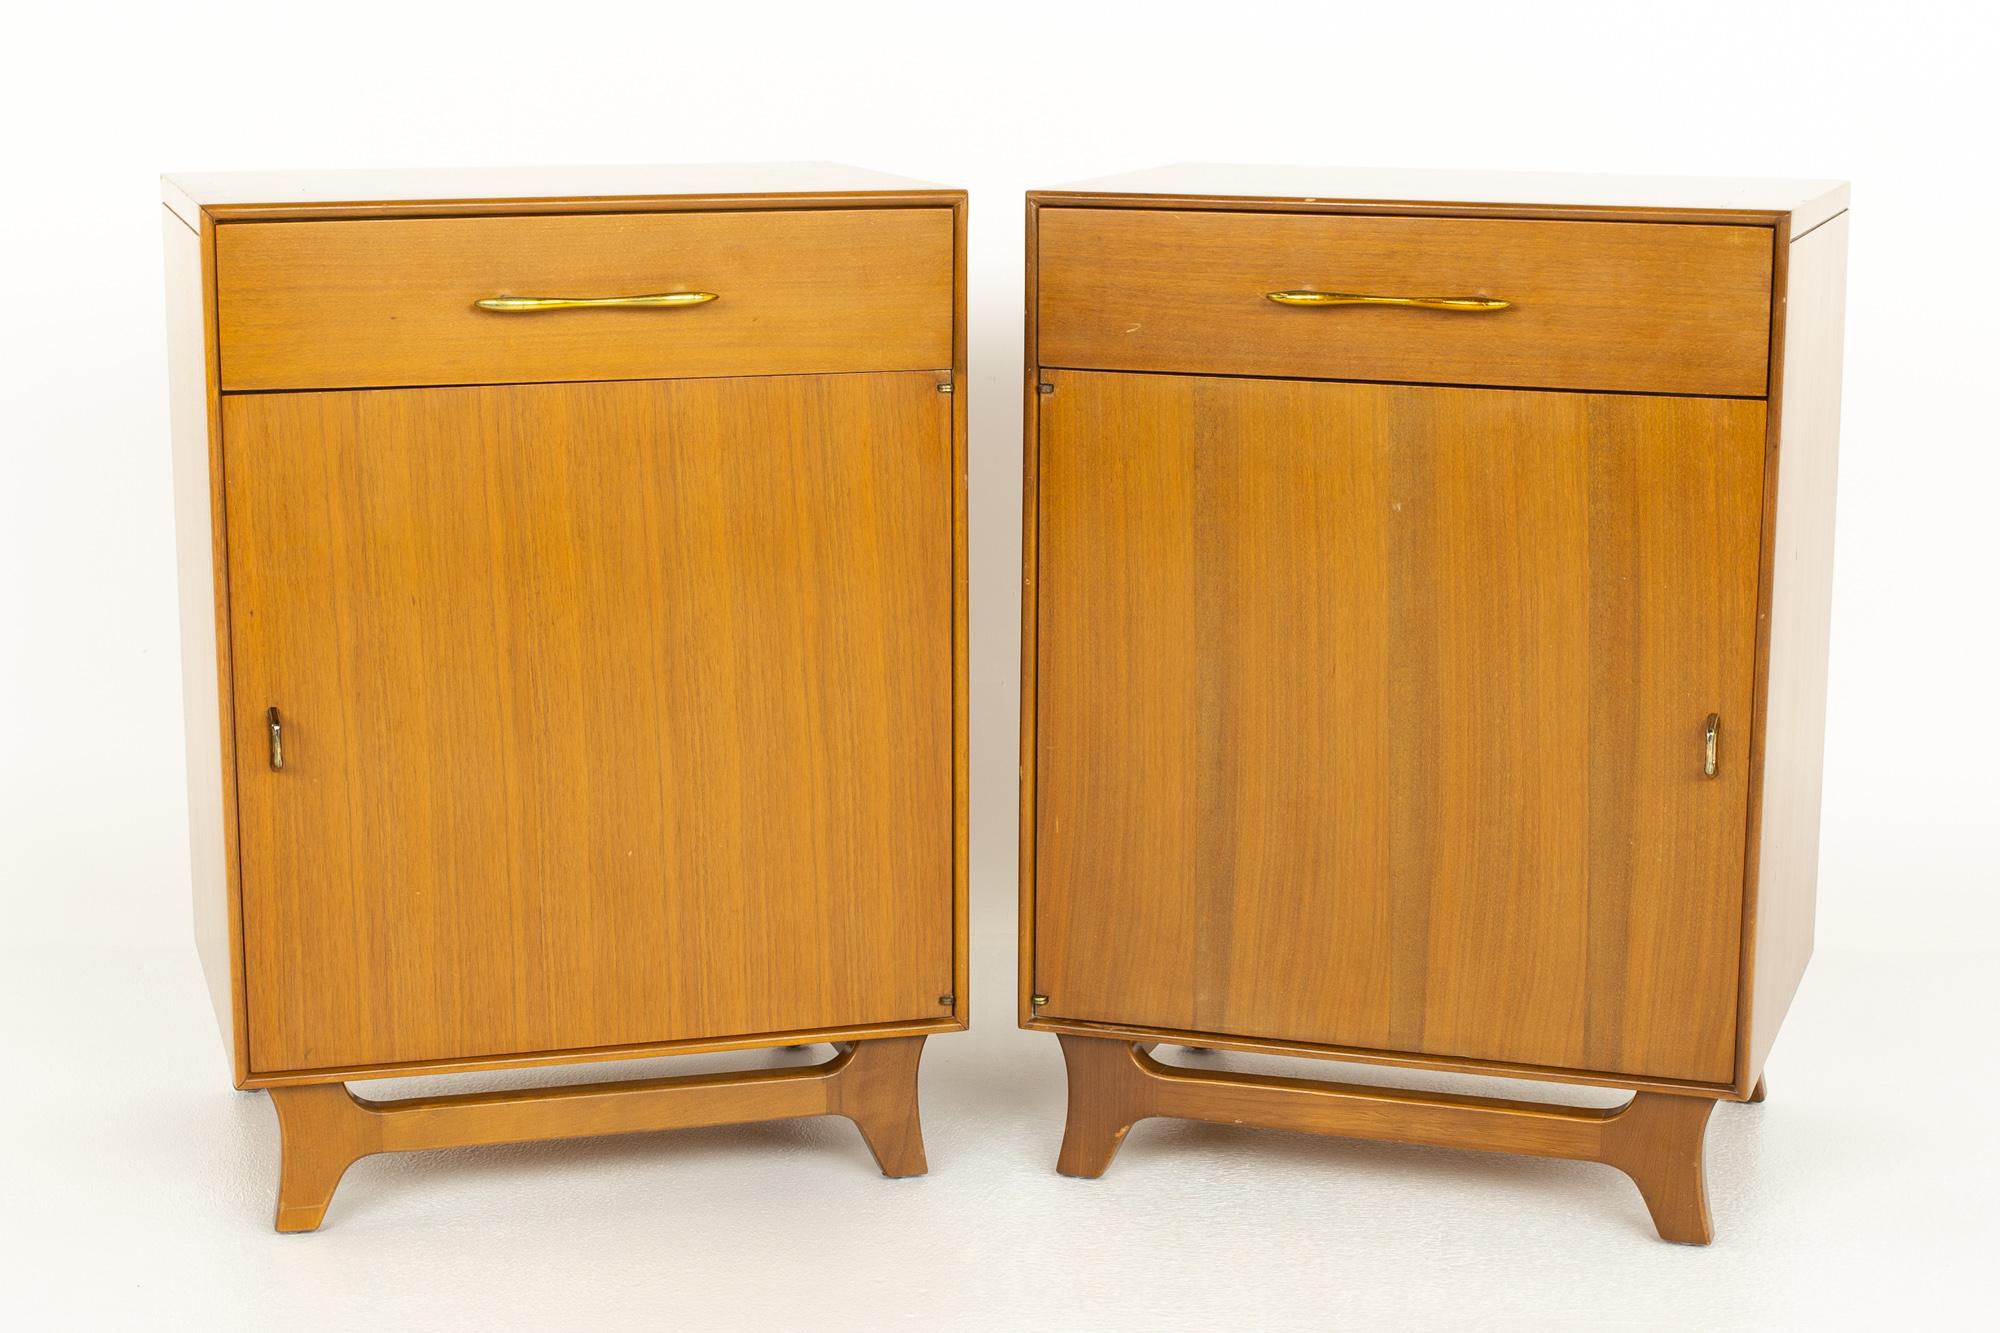 Rway Mid Century Walnut and Brass Nightstands - A Pair

These nightstands measure: 19.75 wide x 15.5 deep x 27.25 inches high

?All pieces of furniture can be had in what we call restored vintage condition. That means the piece is restored upon